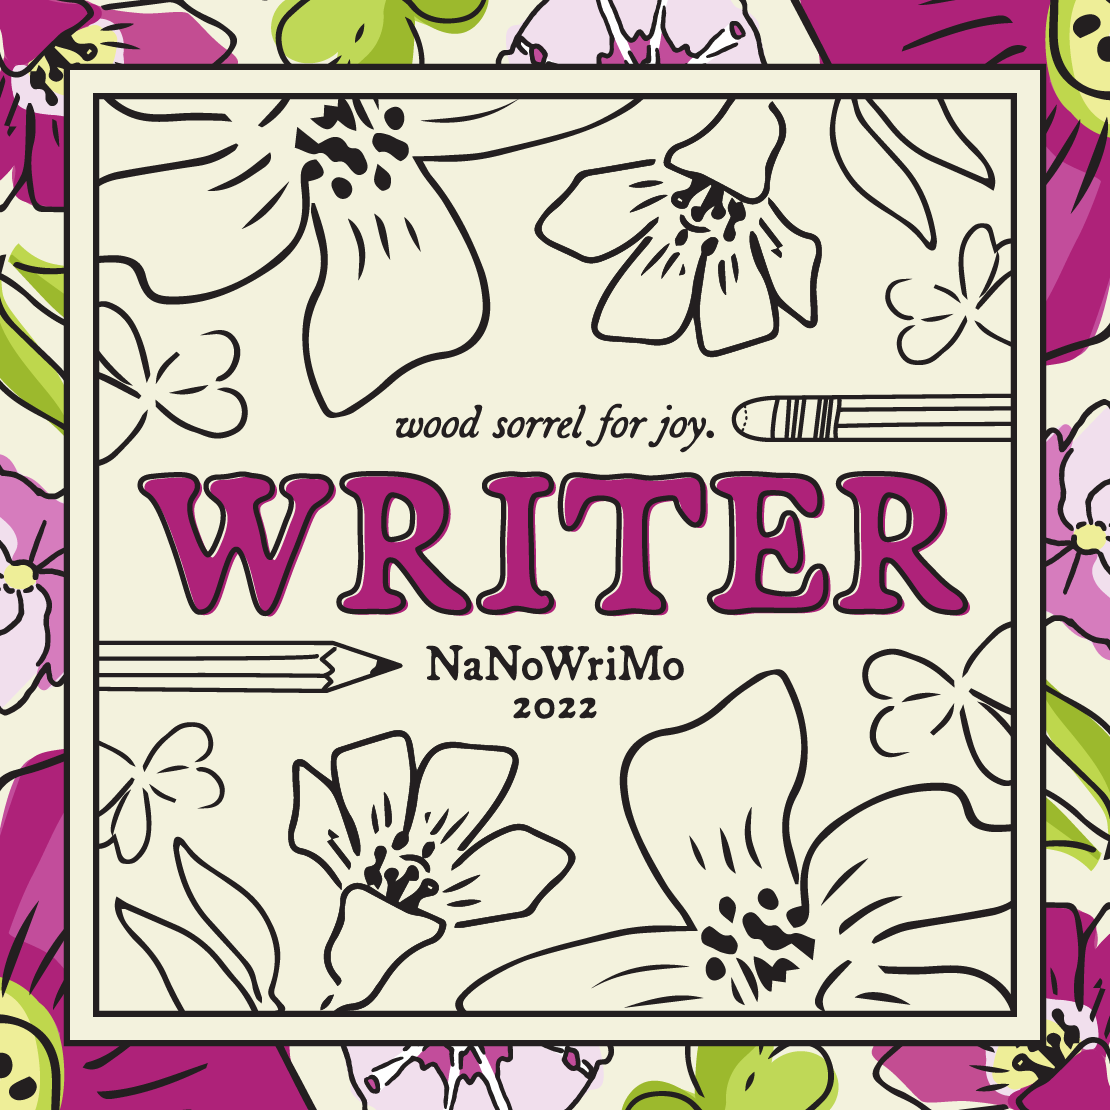 A pink floral logo with the word "Writer" in bold, and the subtext "wood sorrel for joy" and "NaNoWriMo 2022"